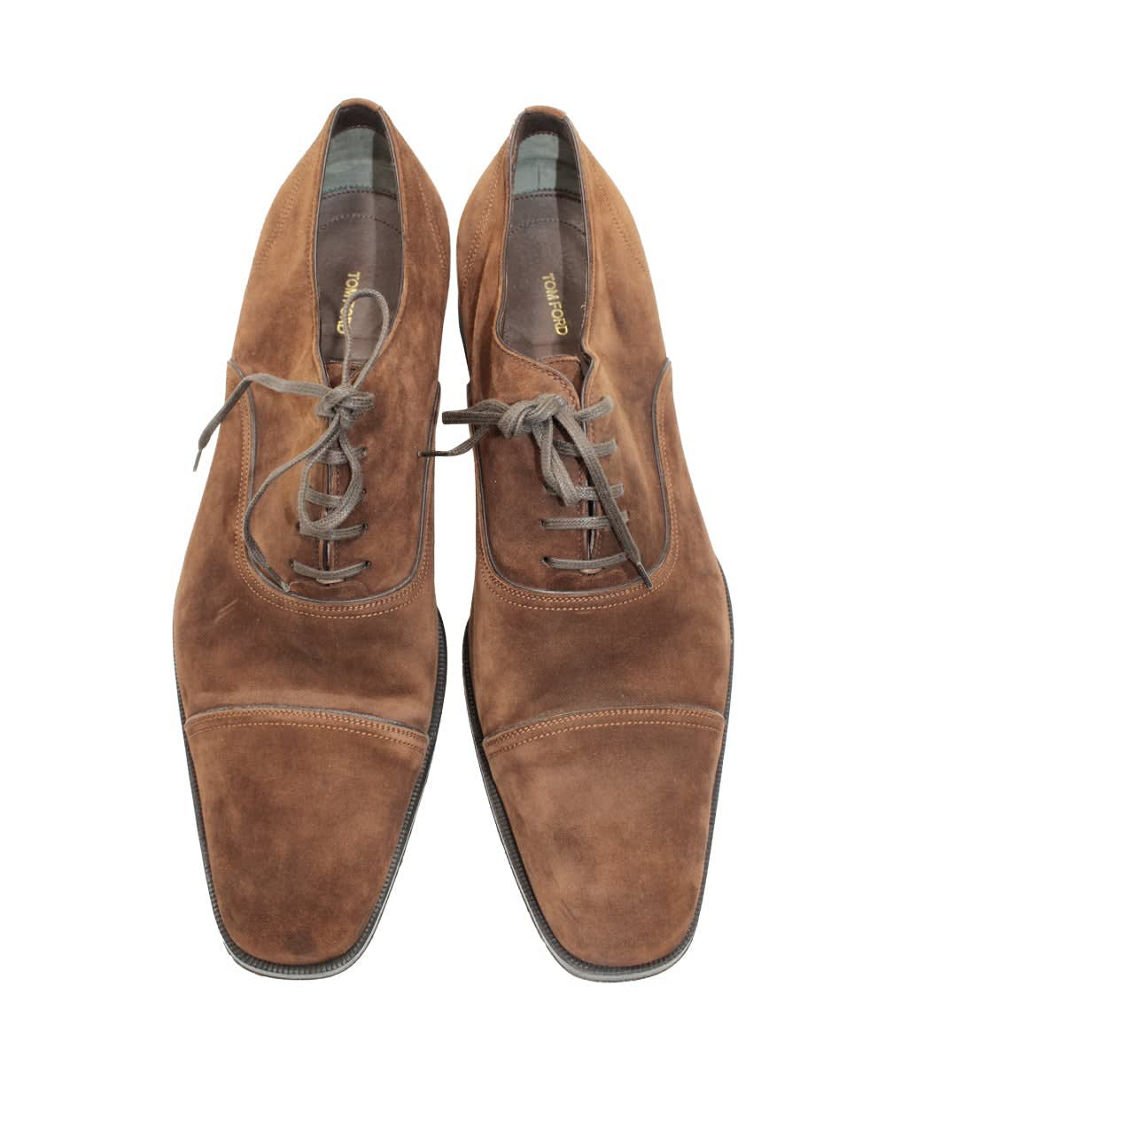 Tom Ford Clayton Cap Toe Oxford Shoes in Brown Suede (Pre-Owned) - Image 5 of 5